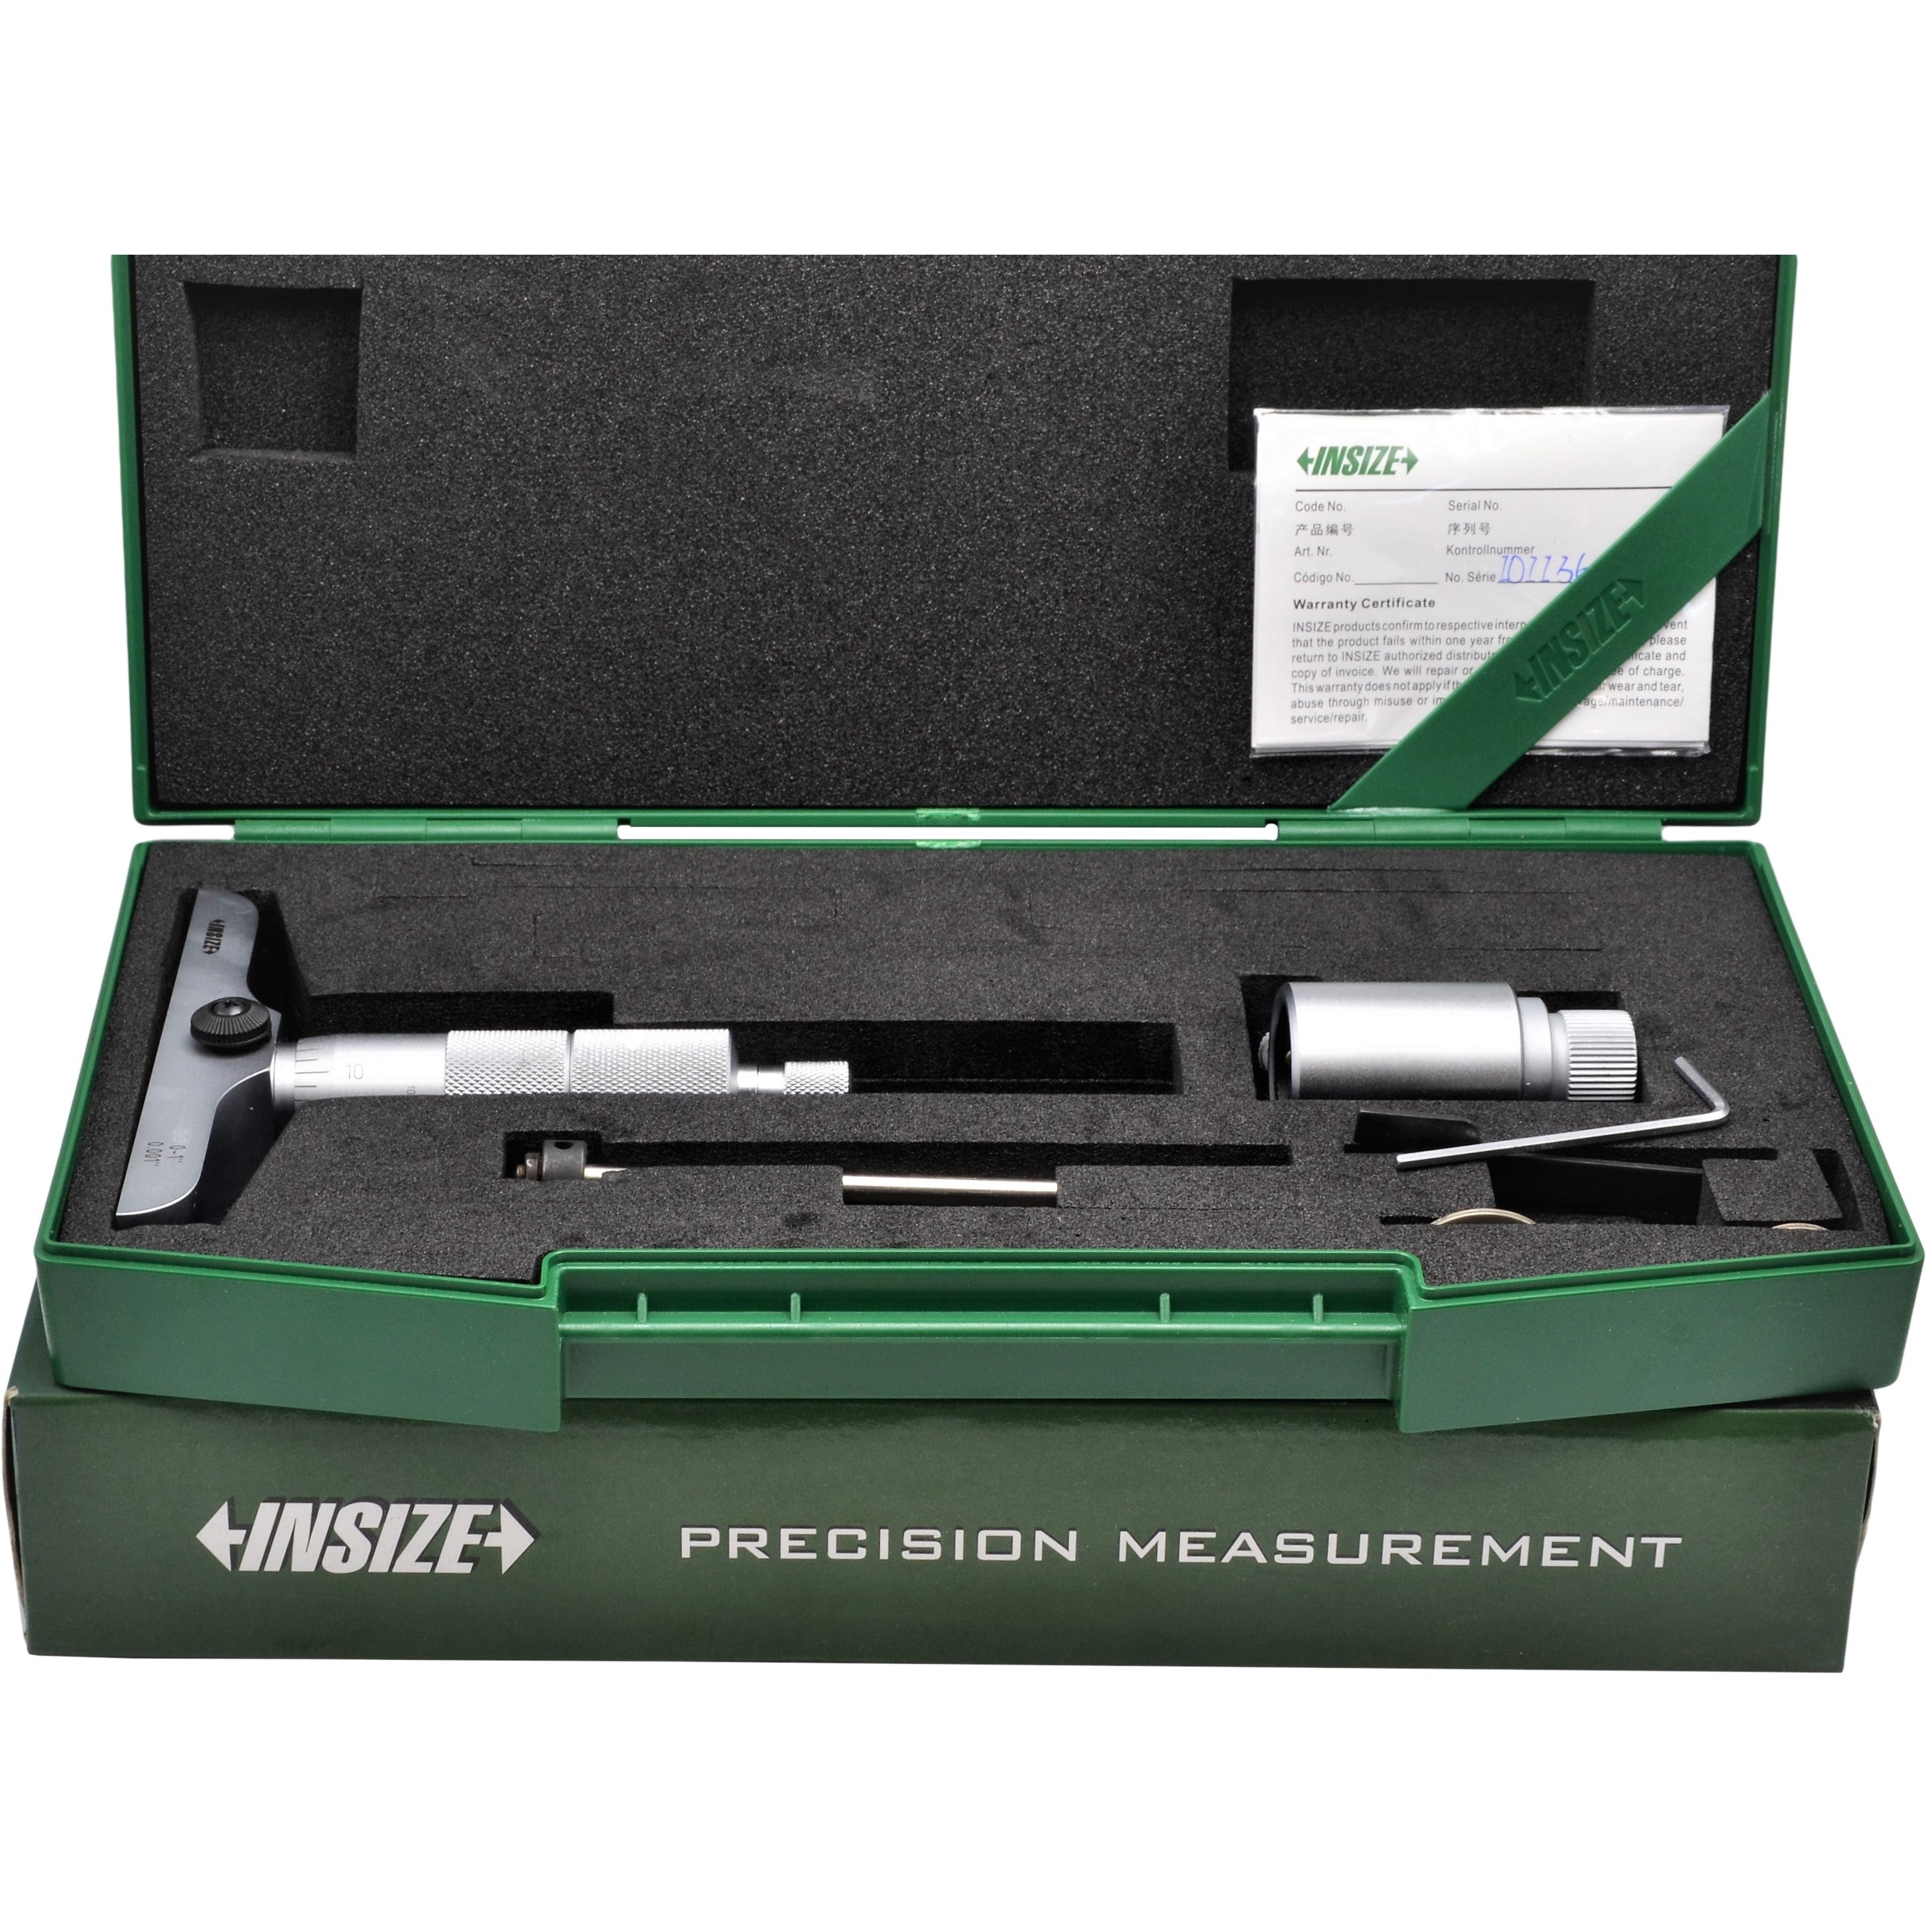 Insize Stabilized Imperial Depth Micrometer 0-1" Range Series 3241-1